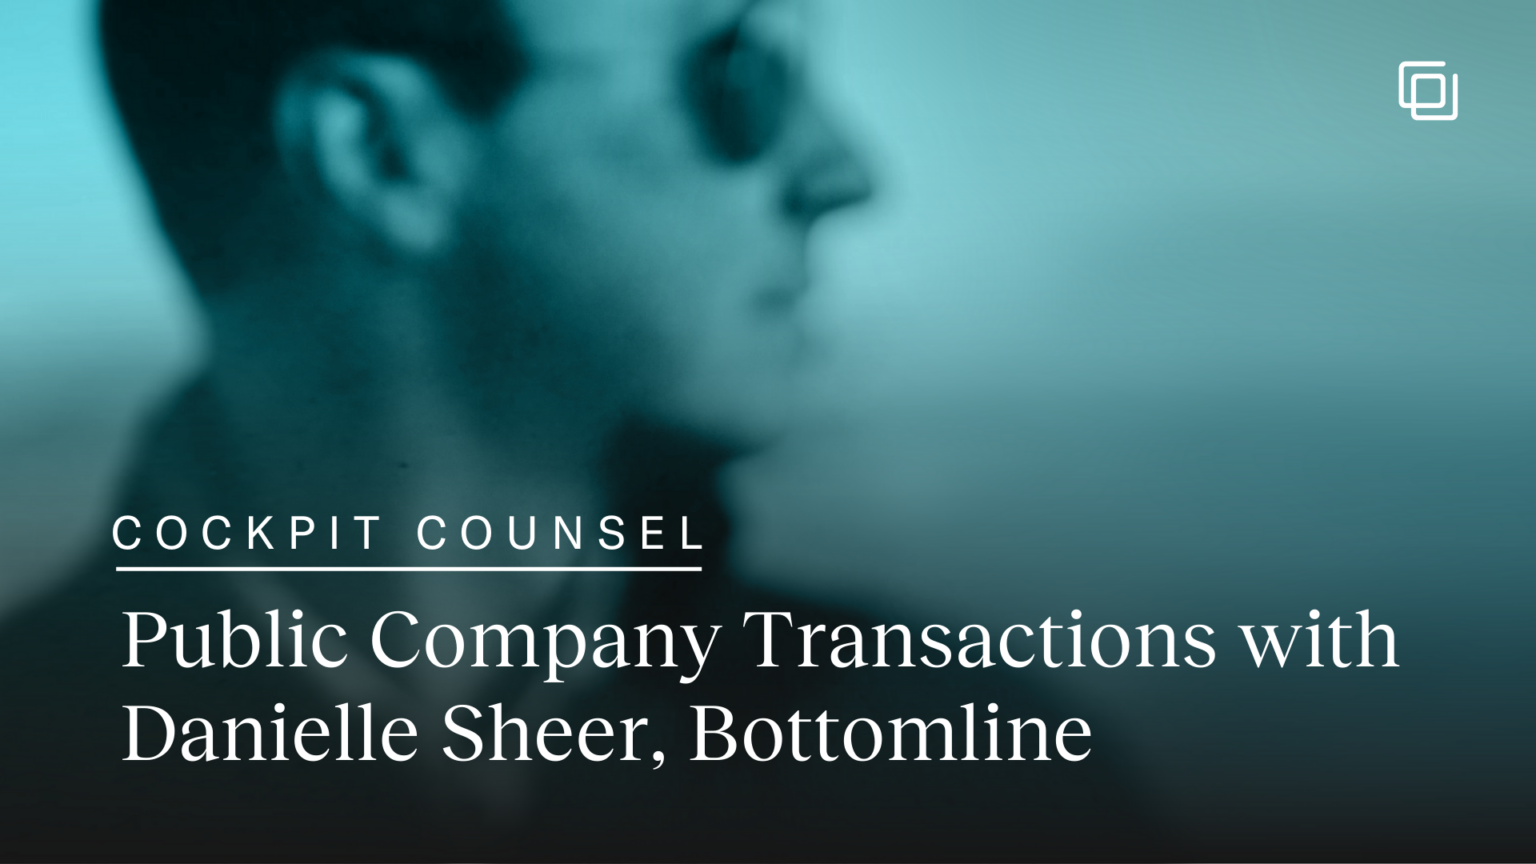 Cockpit Counsel: Public Company Transactions with Danielle Sheer